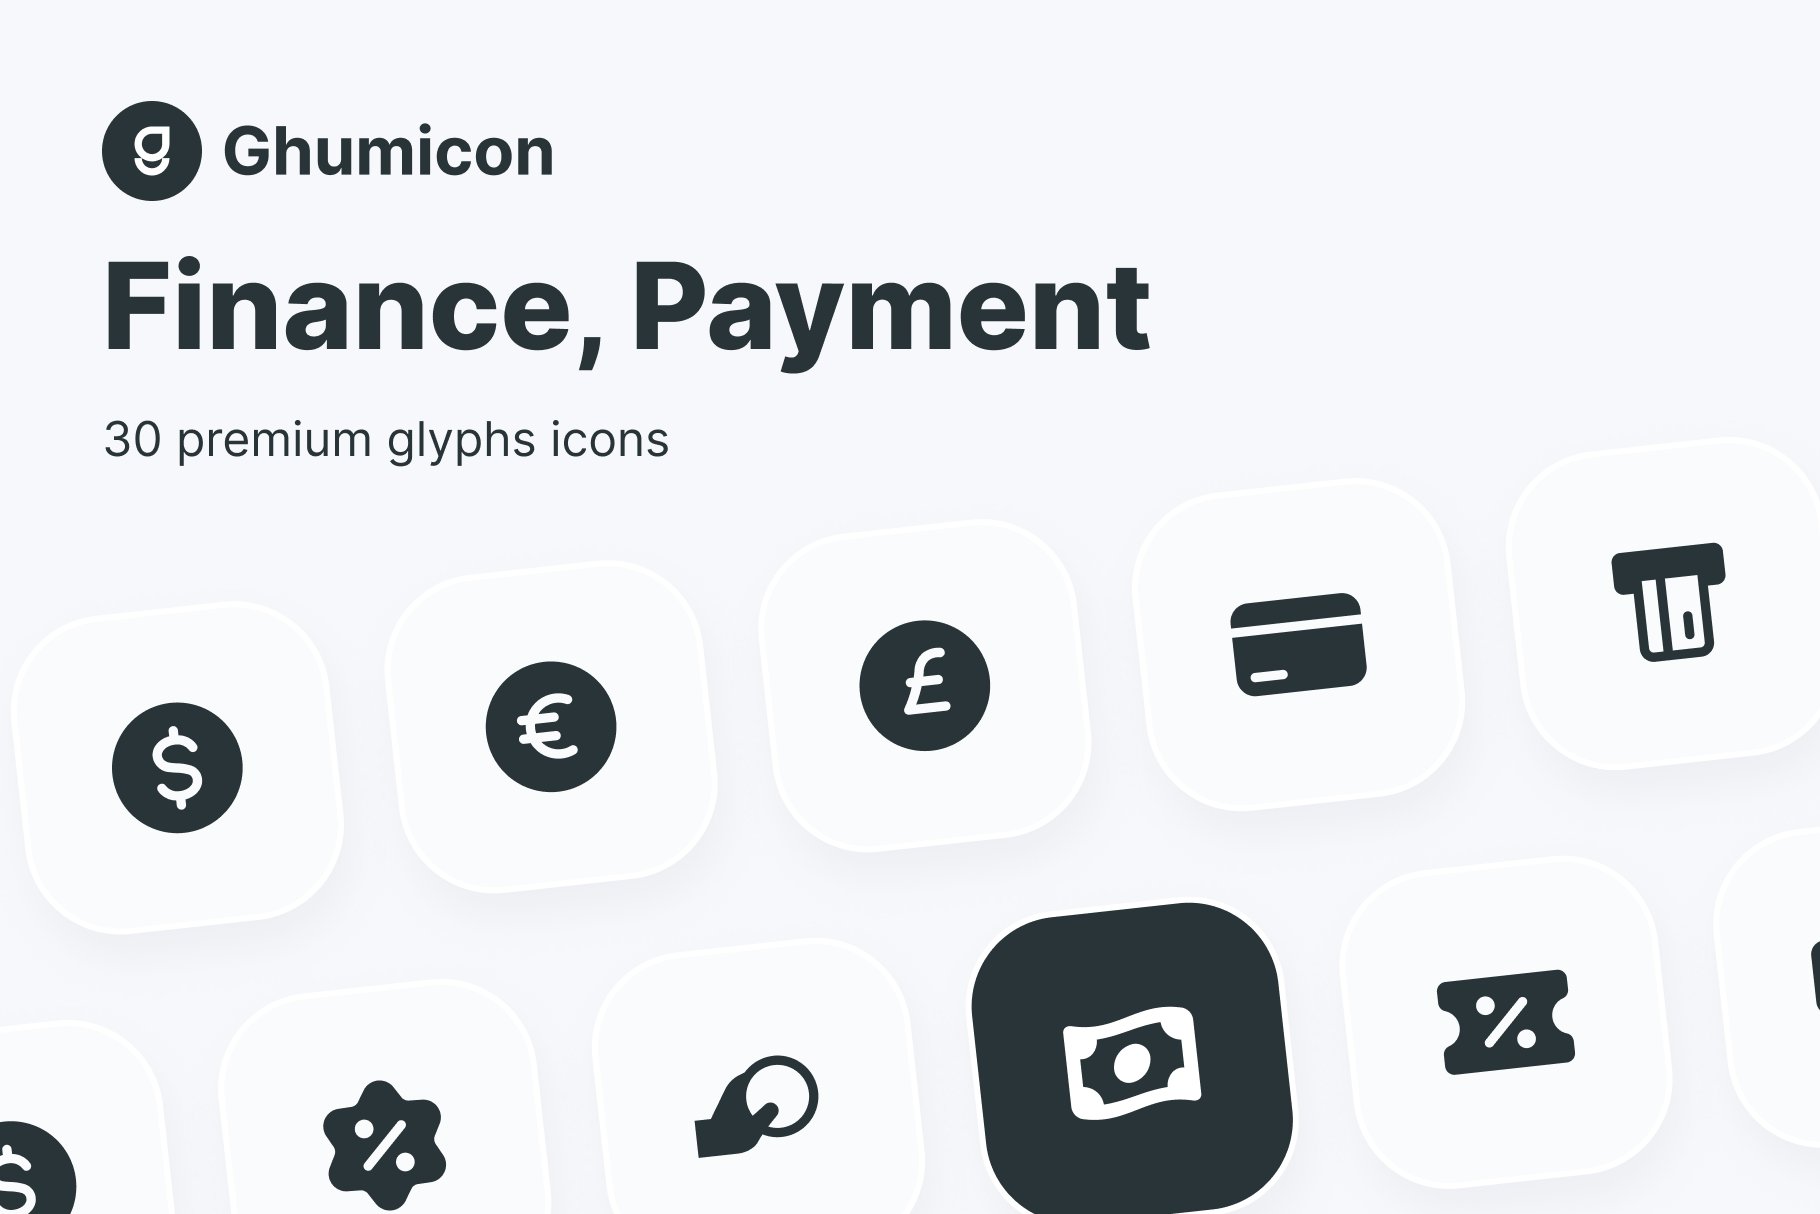 Finance, Payment Glyphs Icon cover image.